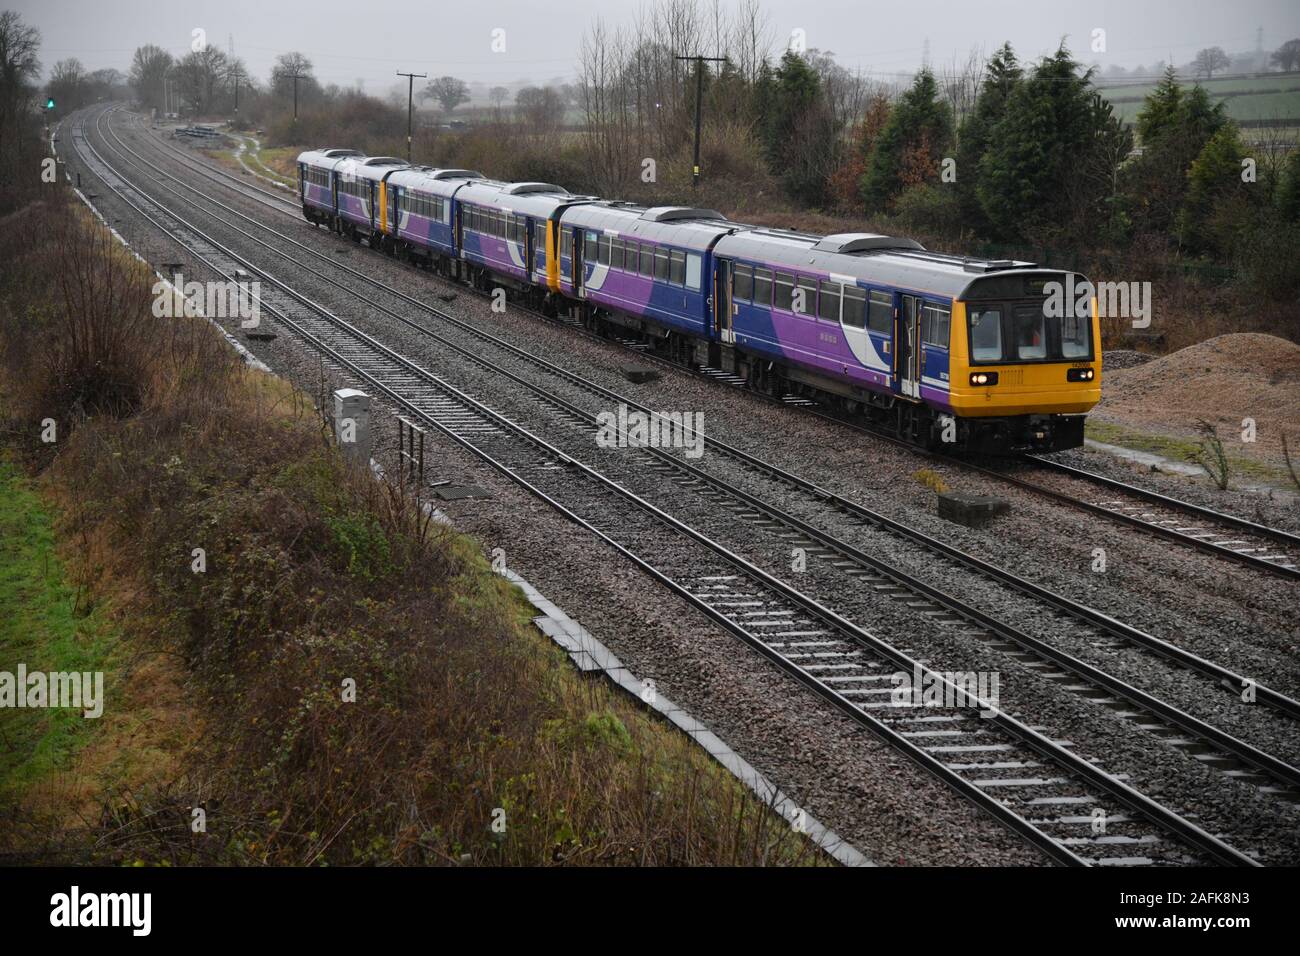 Class 142 Pacers 142088, 142093 and 142096 captured in foul weather make their final journey to the scrap yard at Kingsbury near Tamworth Stock Photo